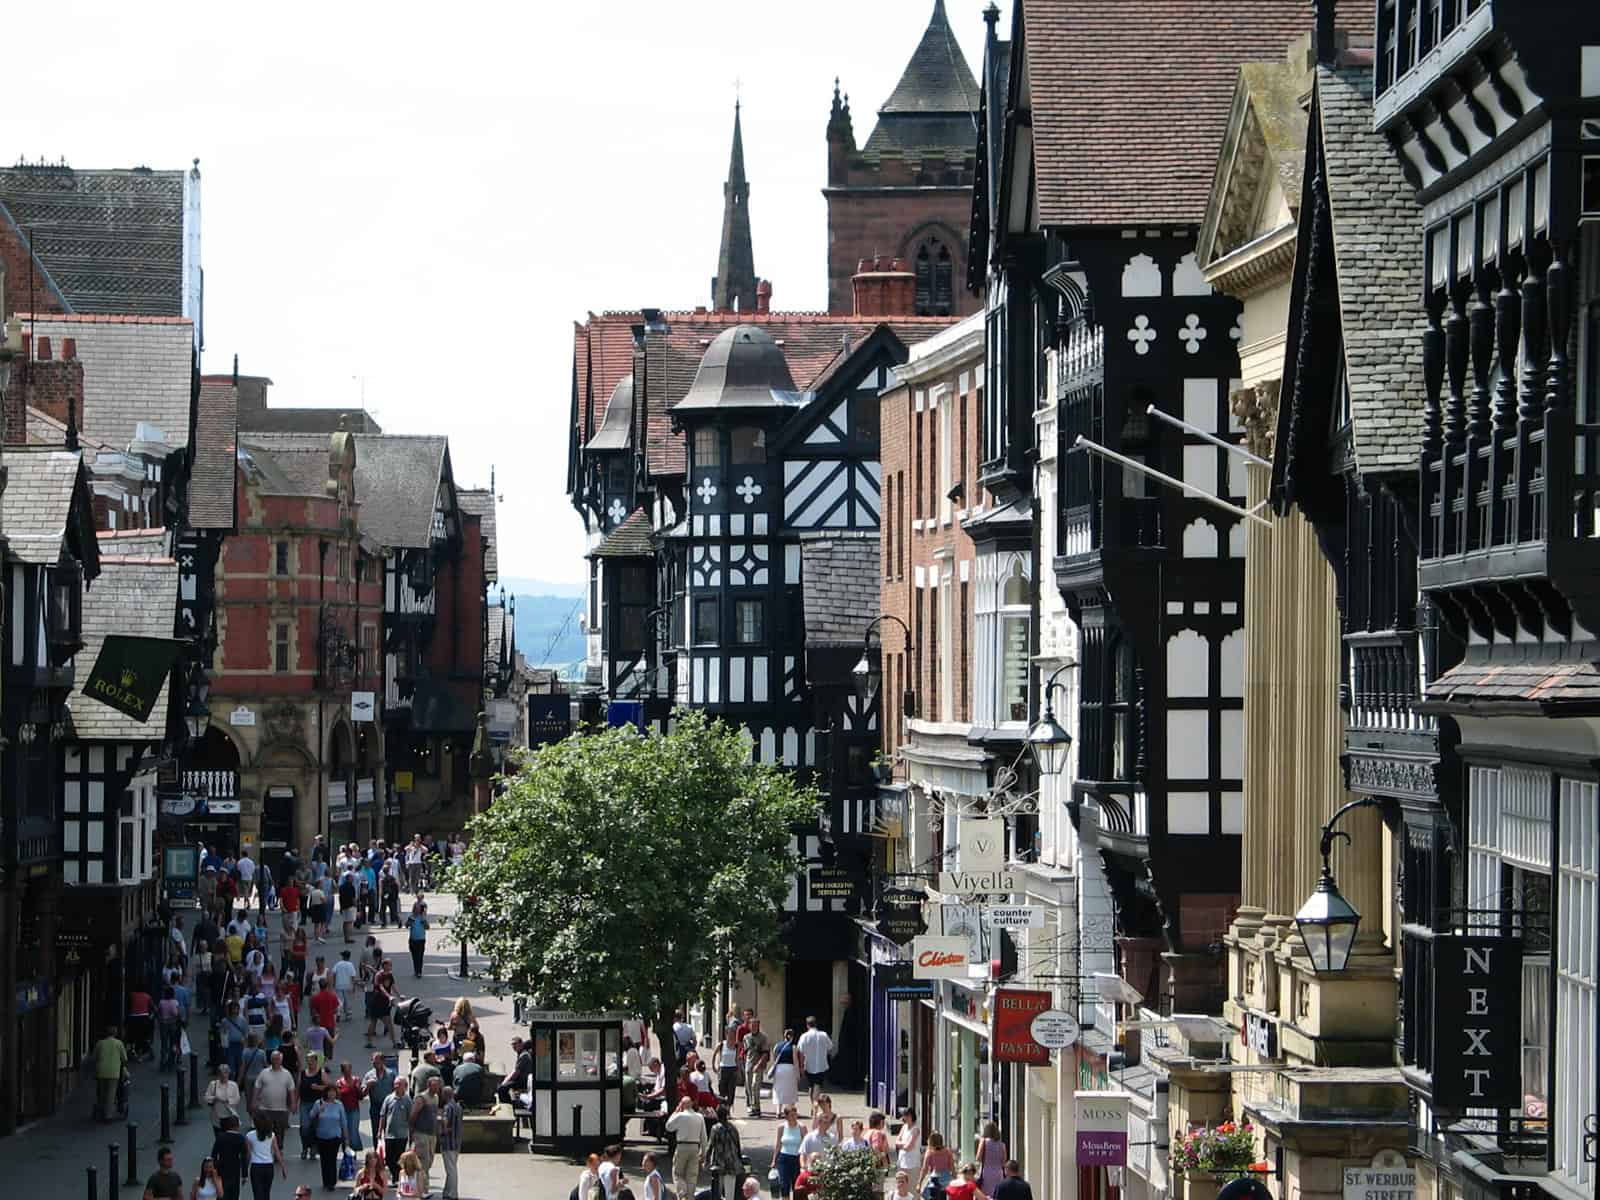 The town of Chester.